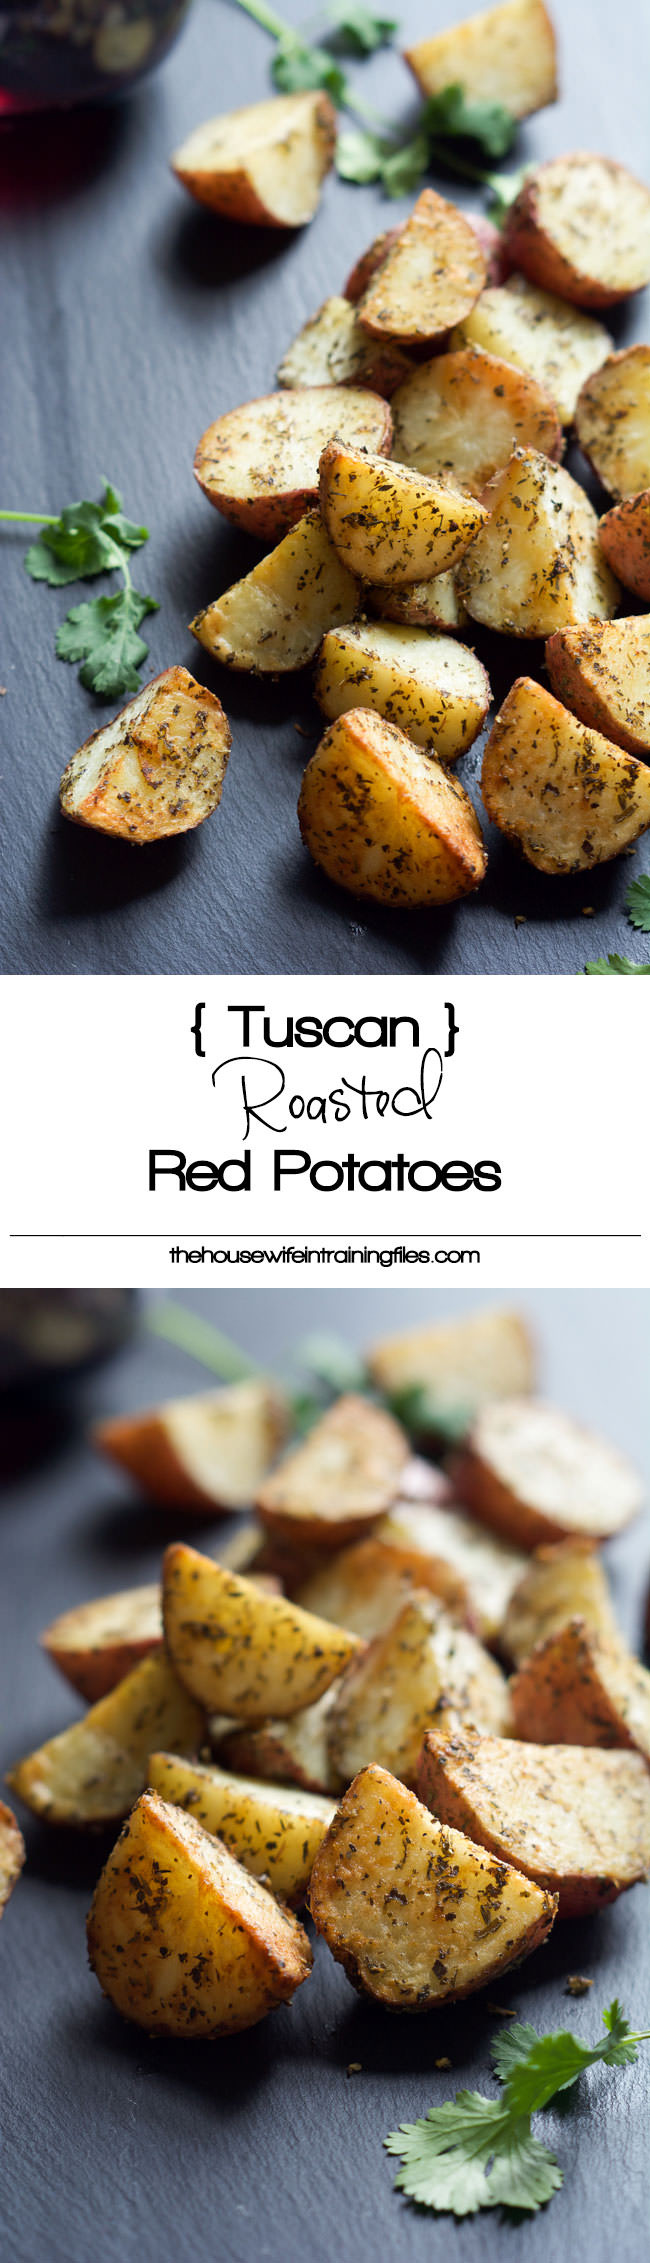 Are Roasted Potatoes Healthy
 Simple Tuscan Oven Roasted Red Potatoes